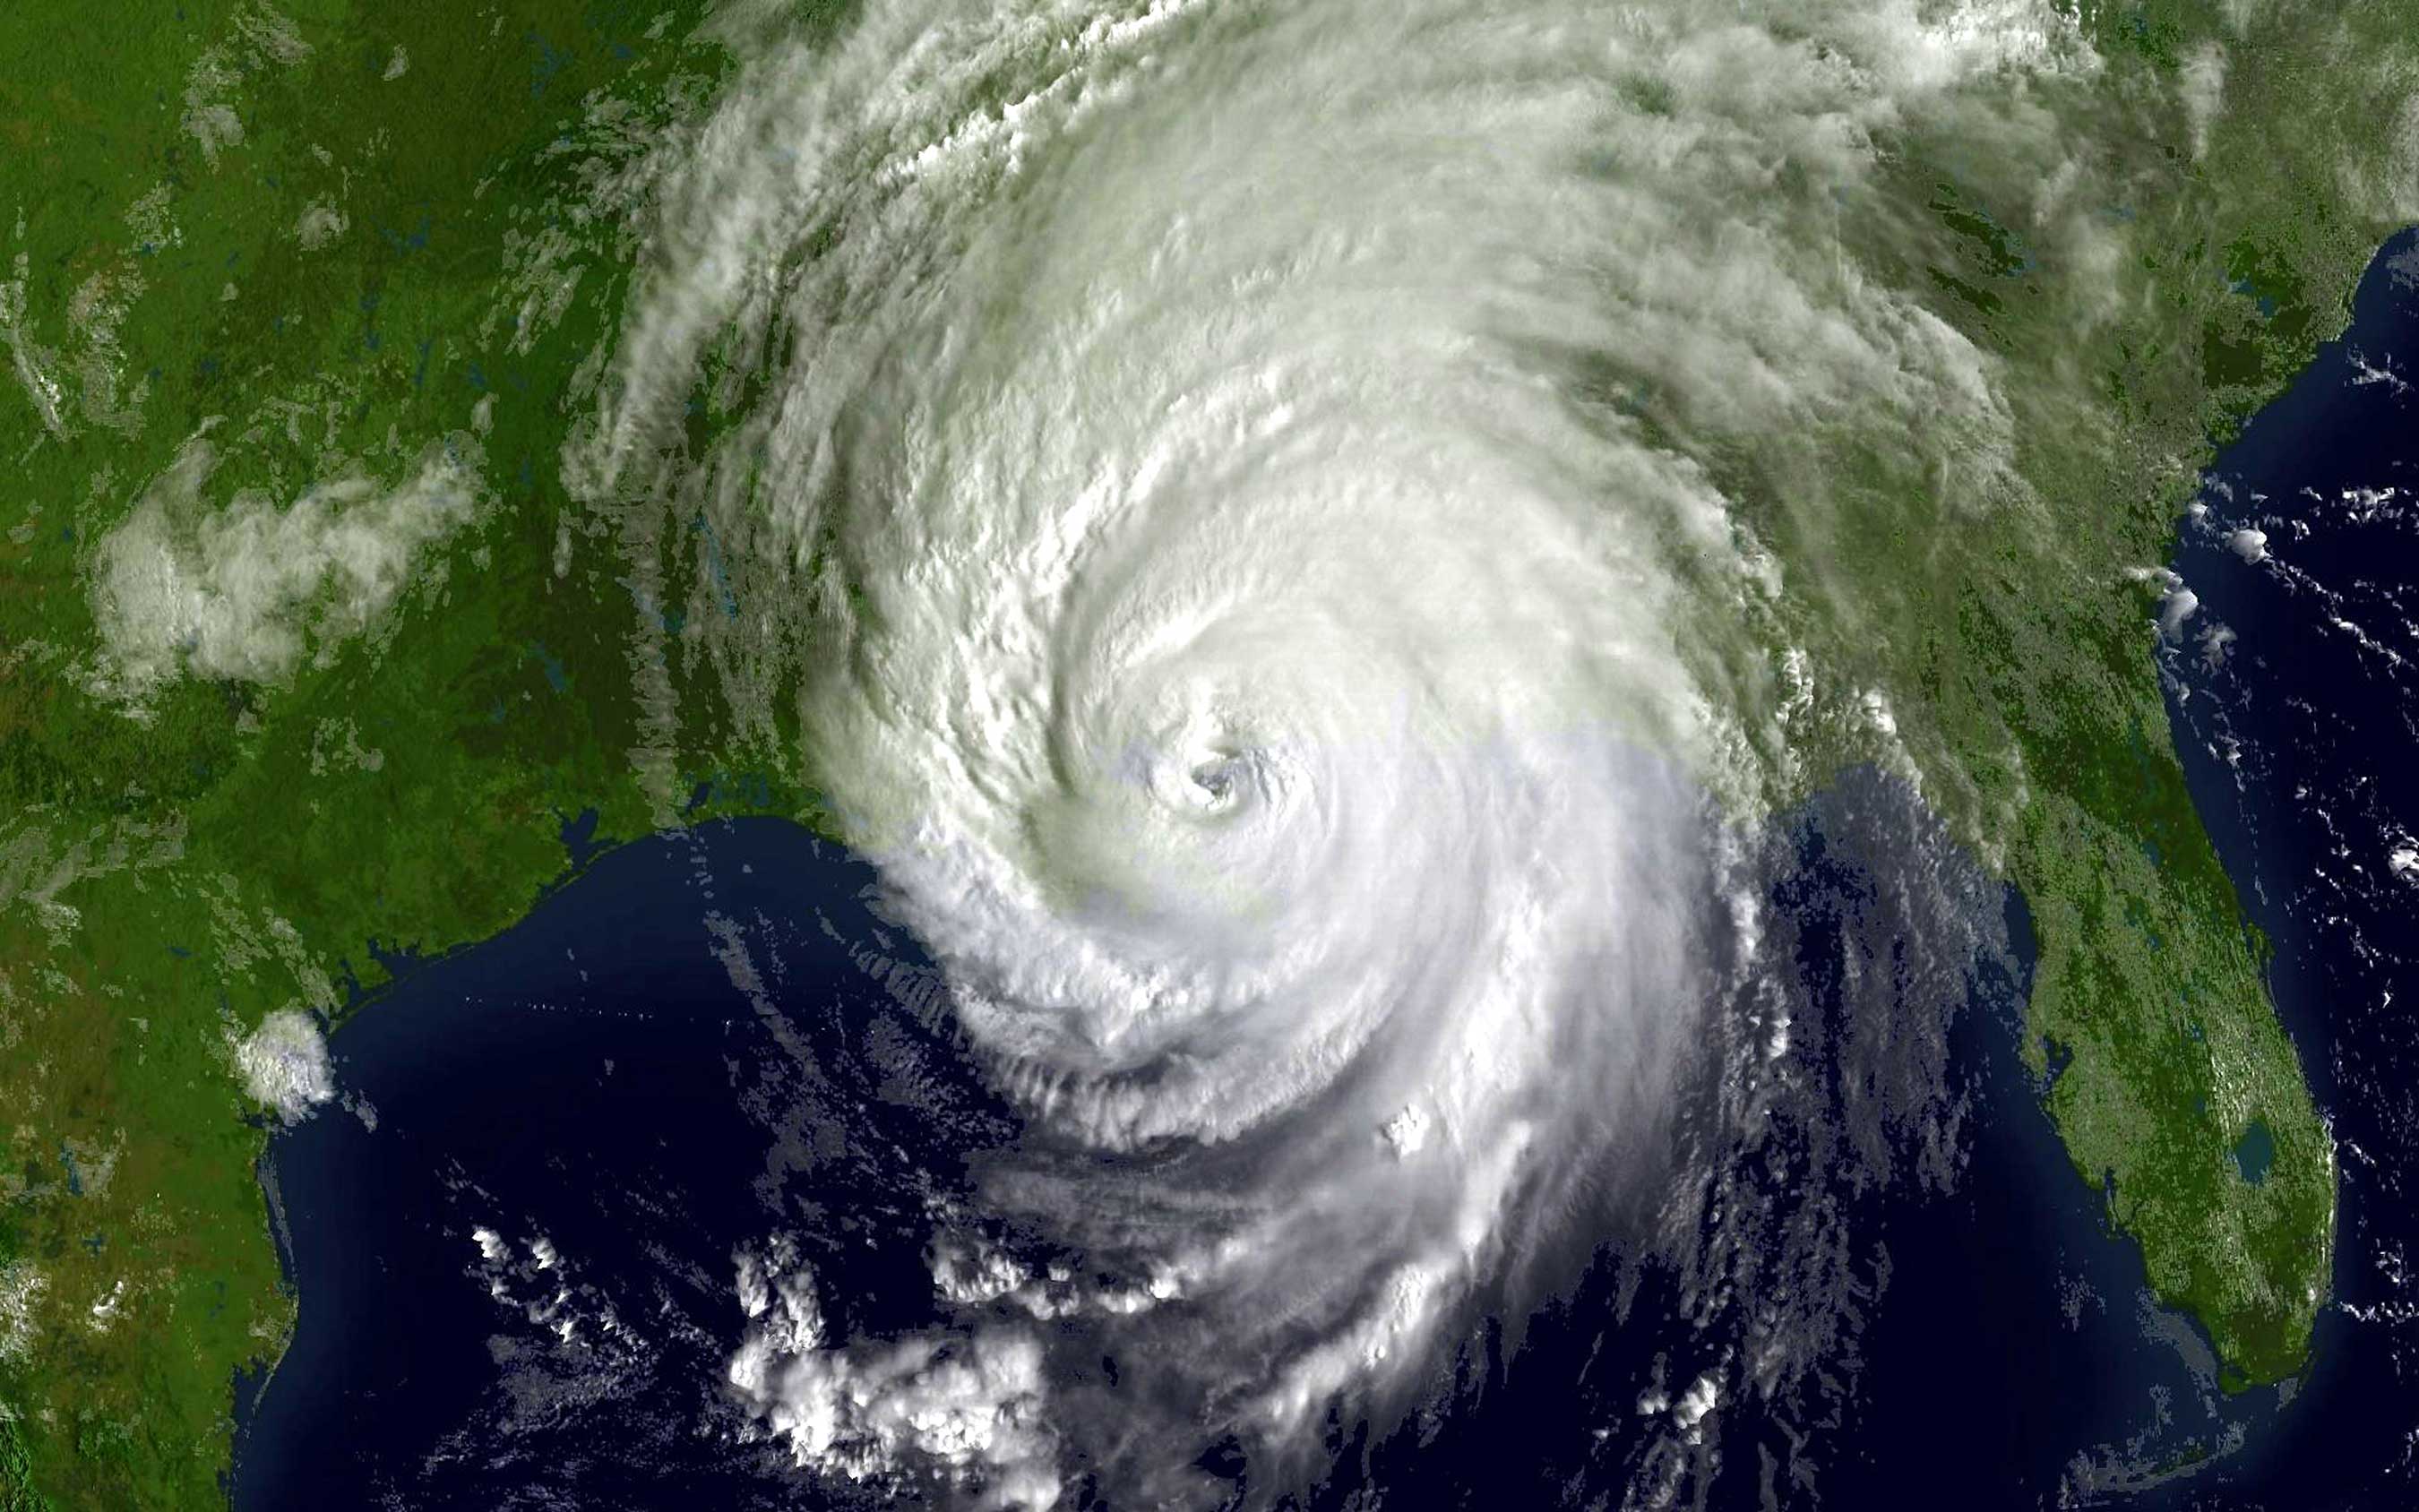 One of the largest storms ever to hit the U.S., Hurricane Katrina just before landfall.